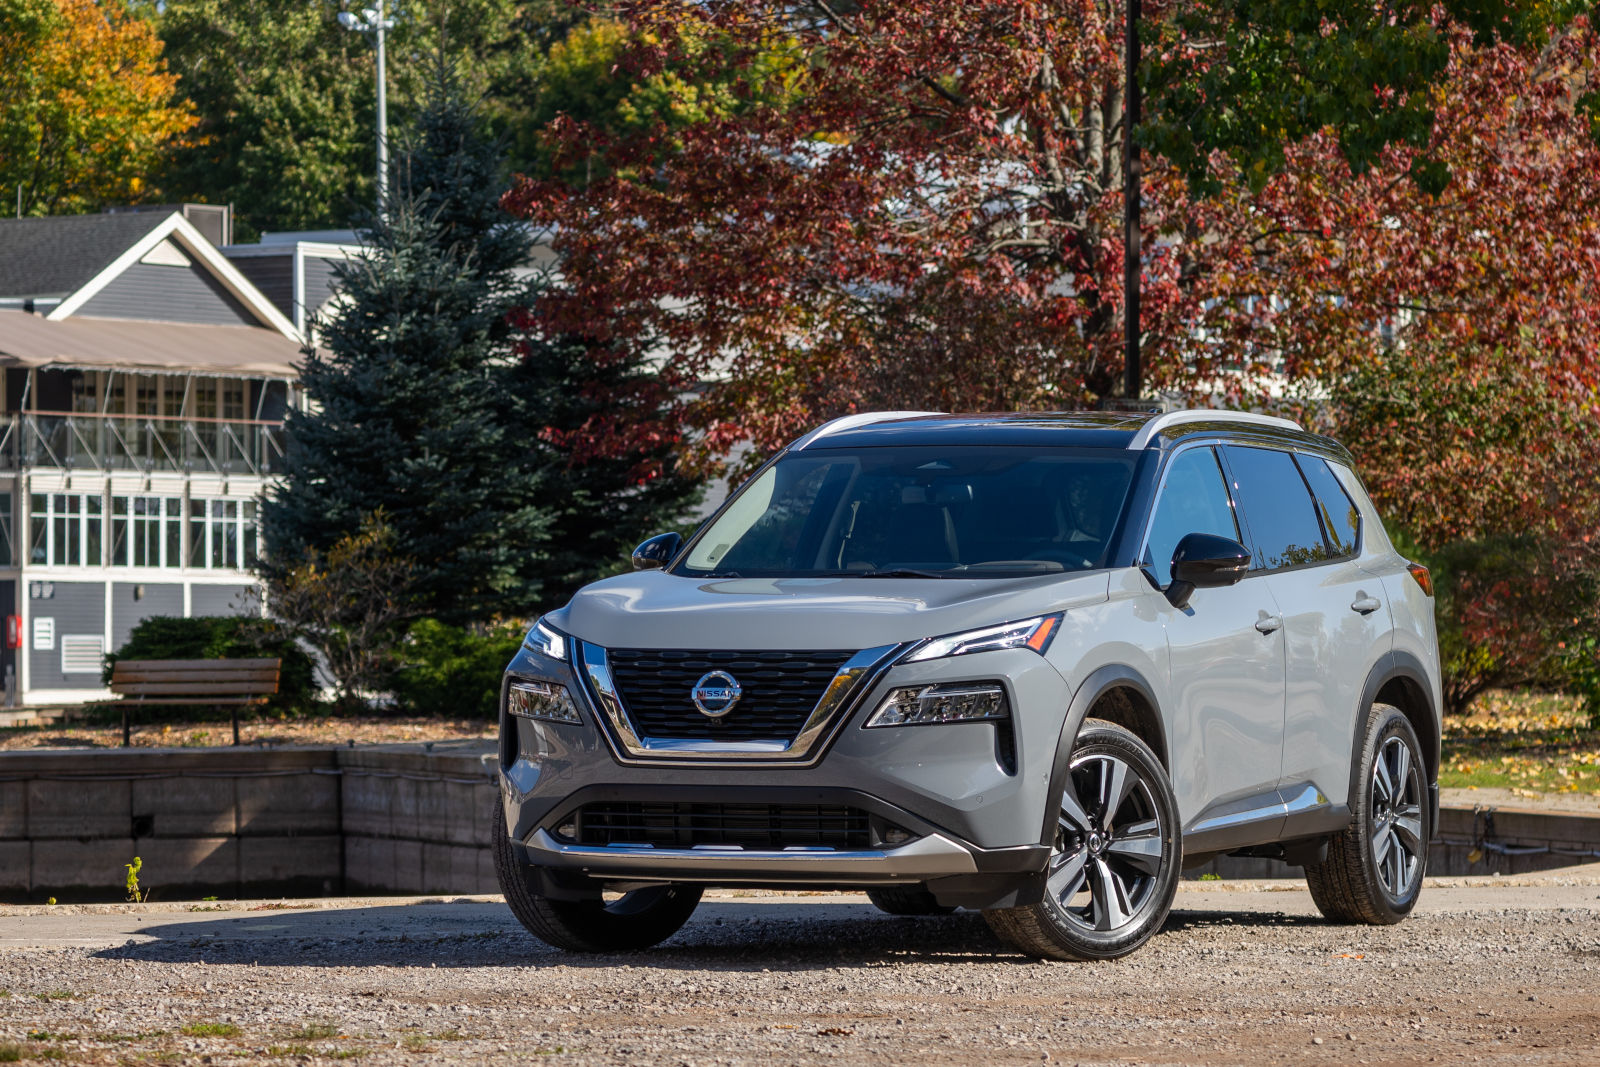 A few things the 2023 Nissan Rogue does better than the 2023 Toyota RAV4